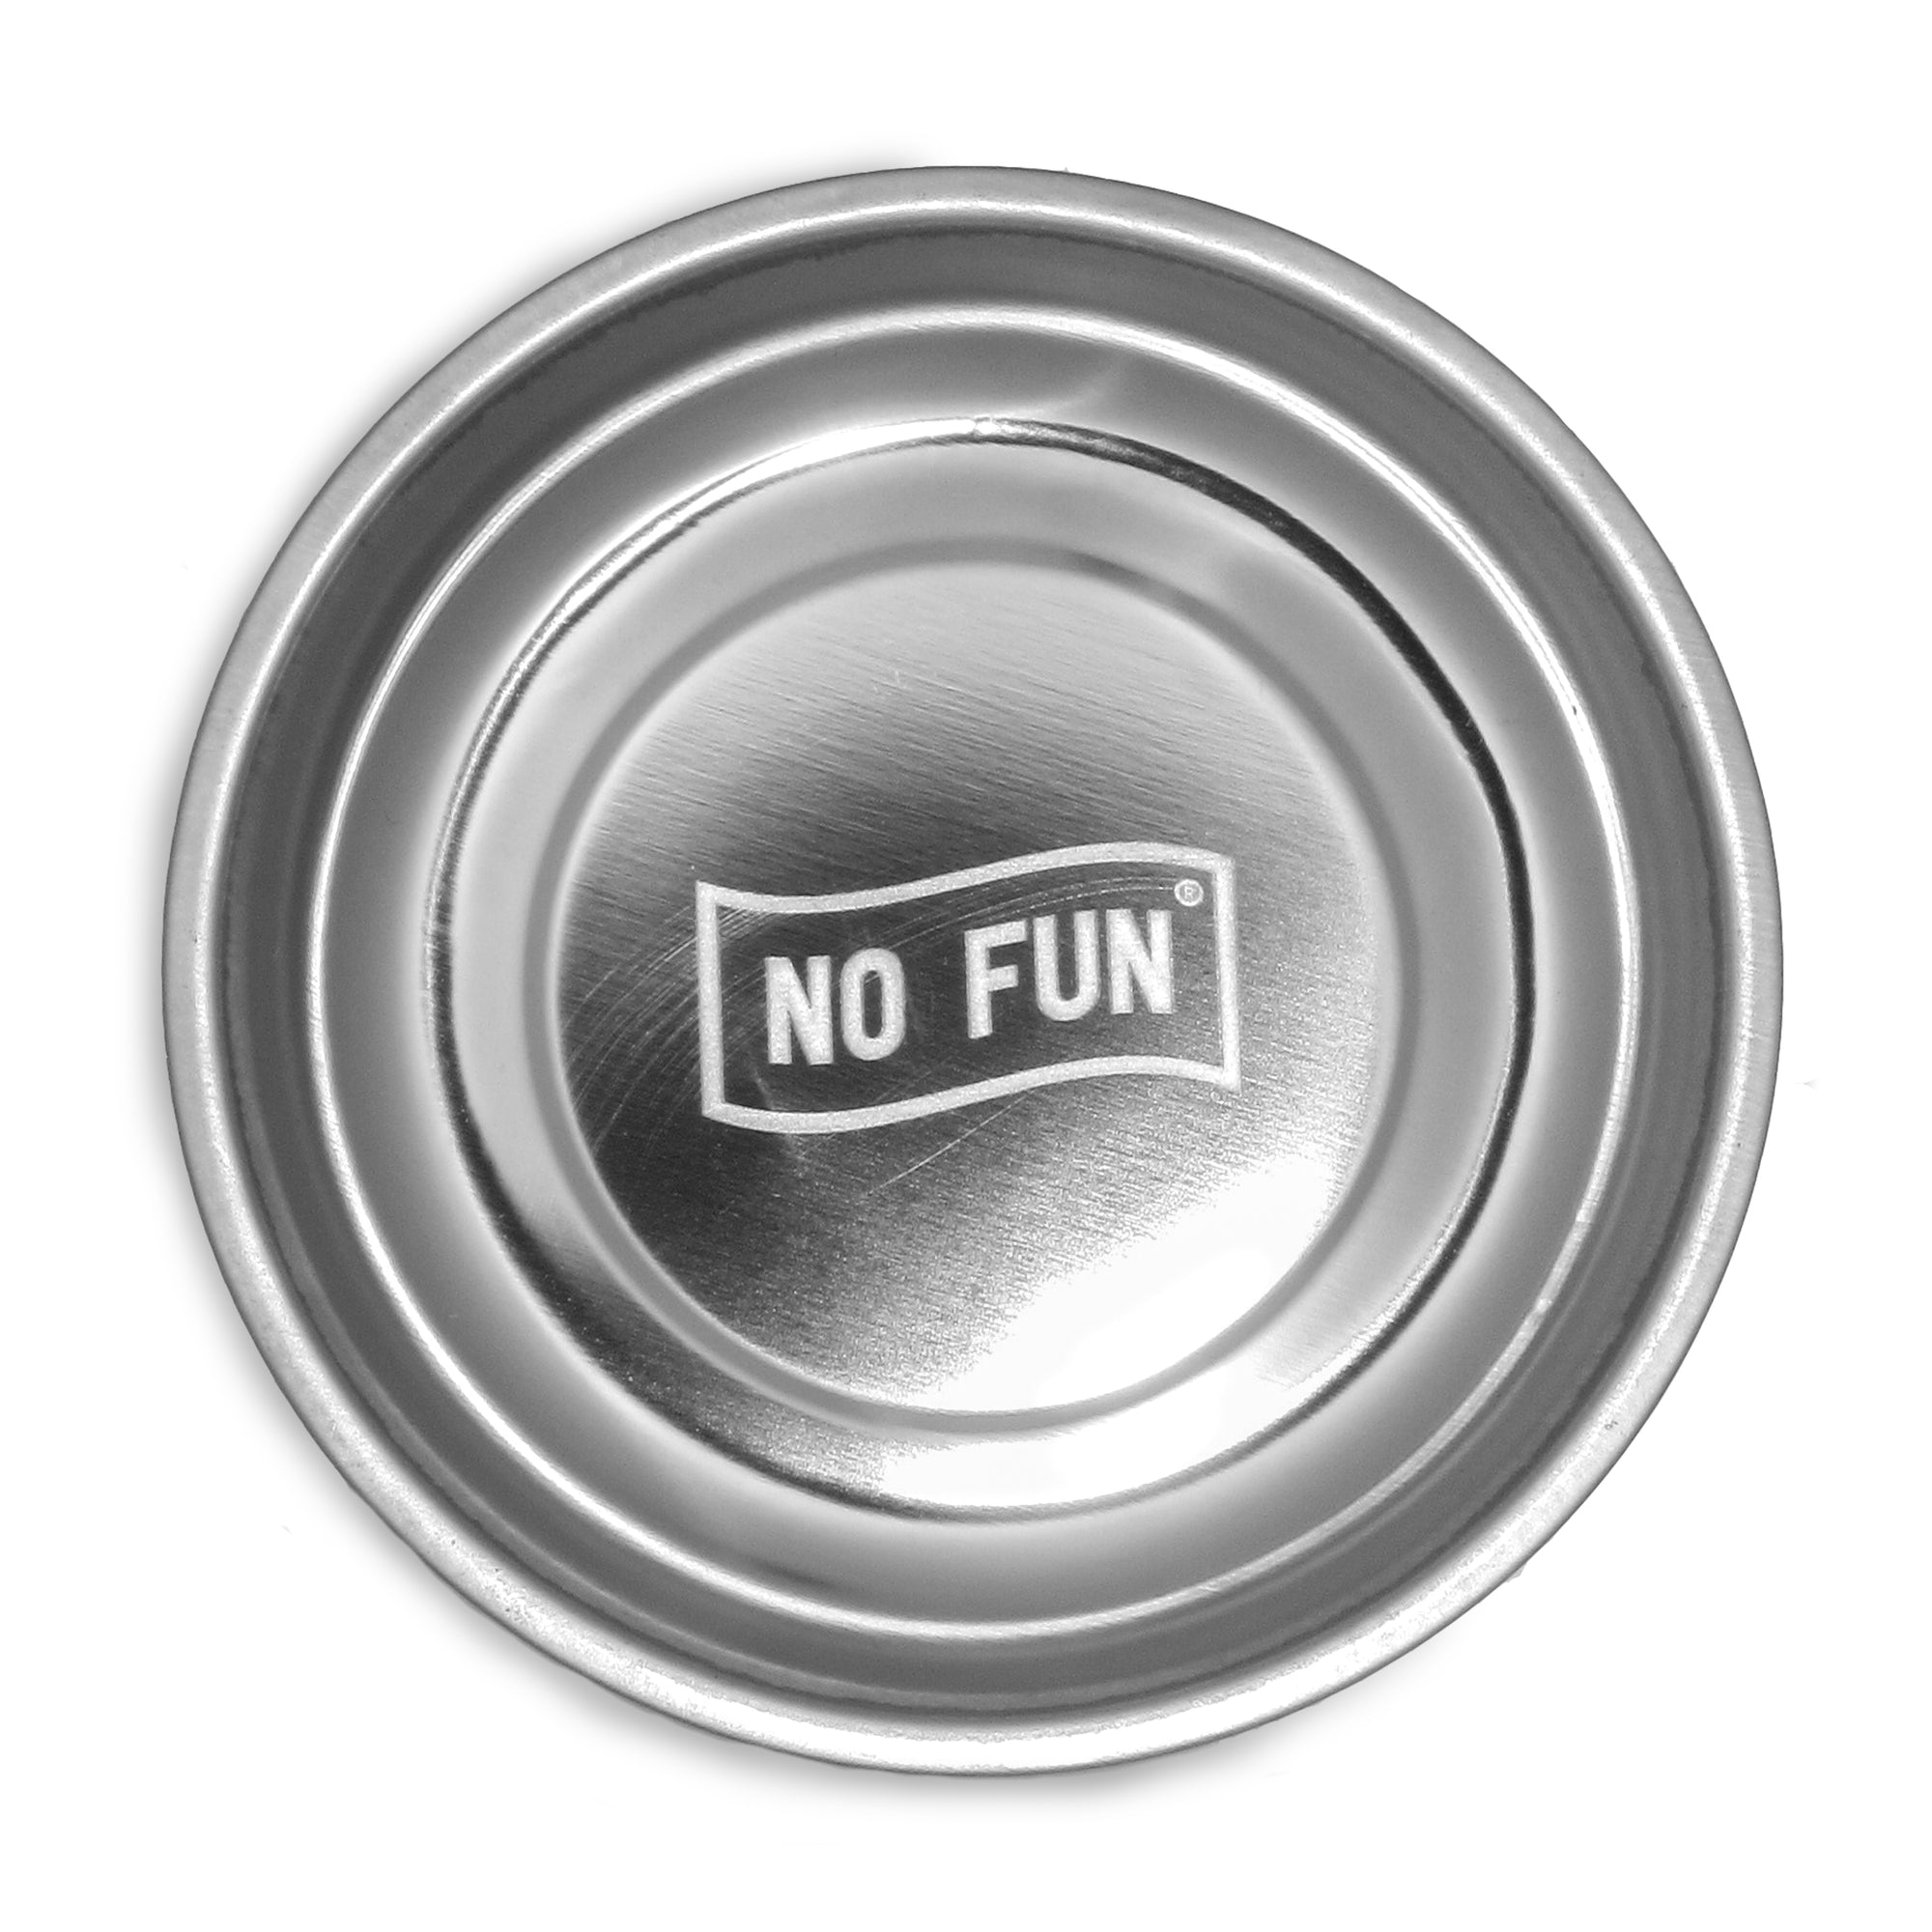 The "WORK" Magnetic Dish by No Fun®.  Magnetic dish is stainless steel, with a large magnet at the bottom.  There is a "No Fun®" logo etched in the base of the dish.